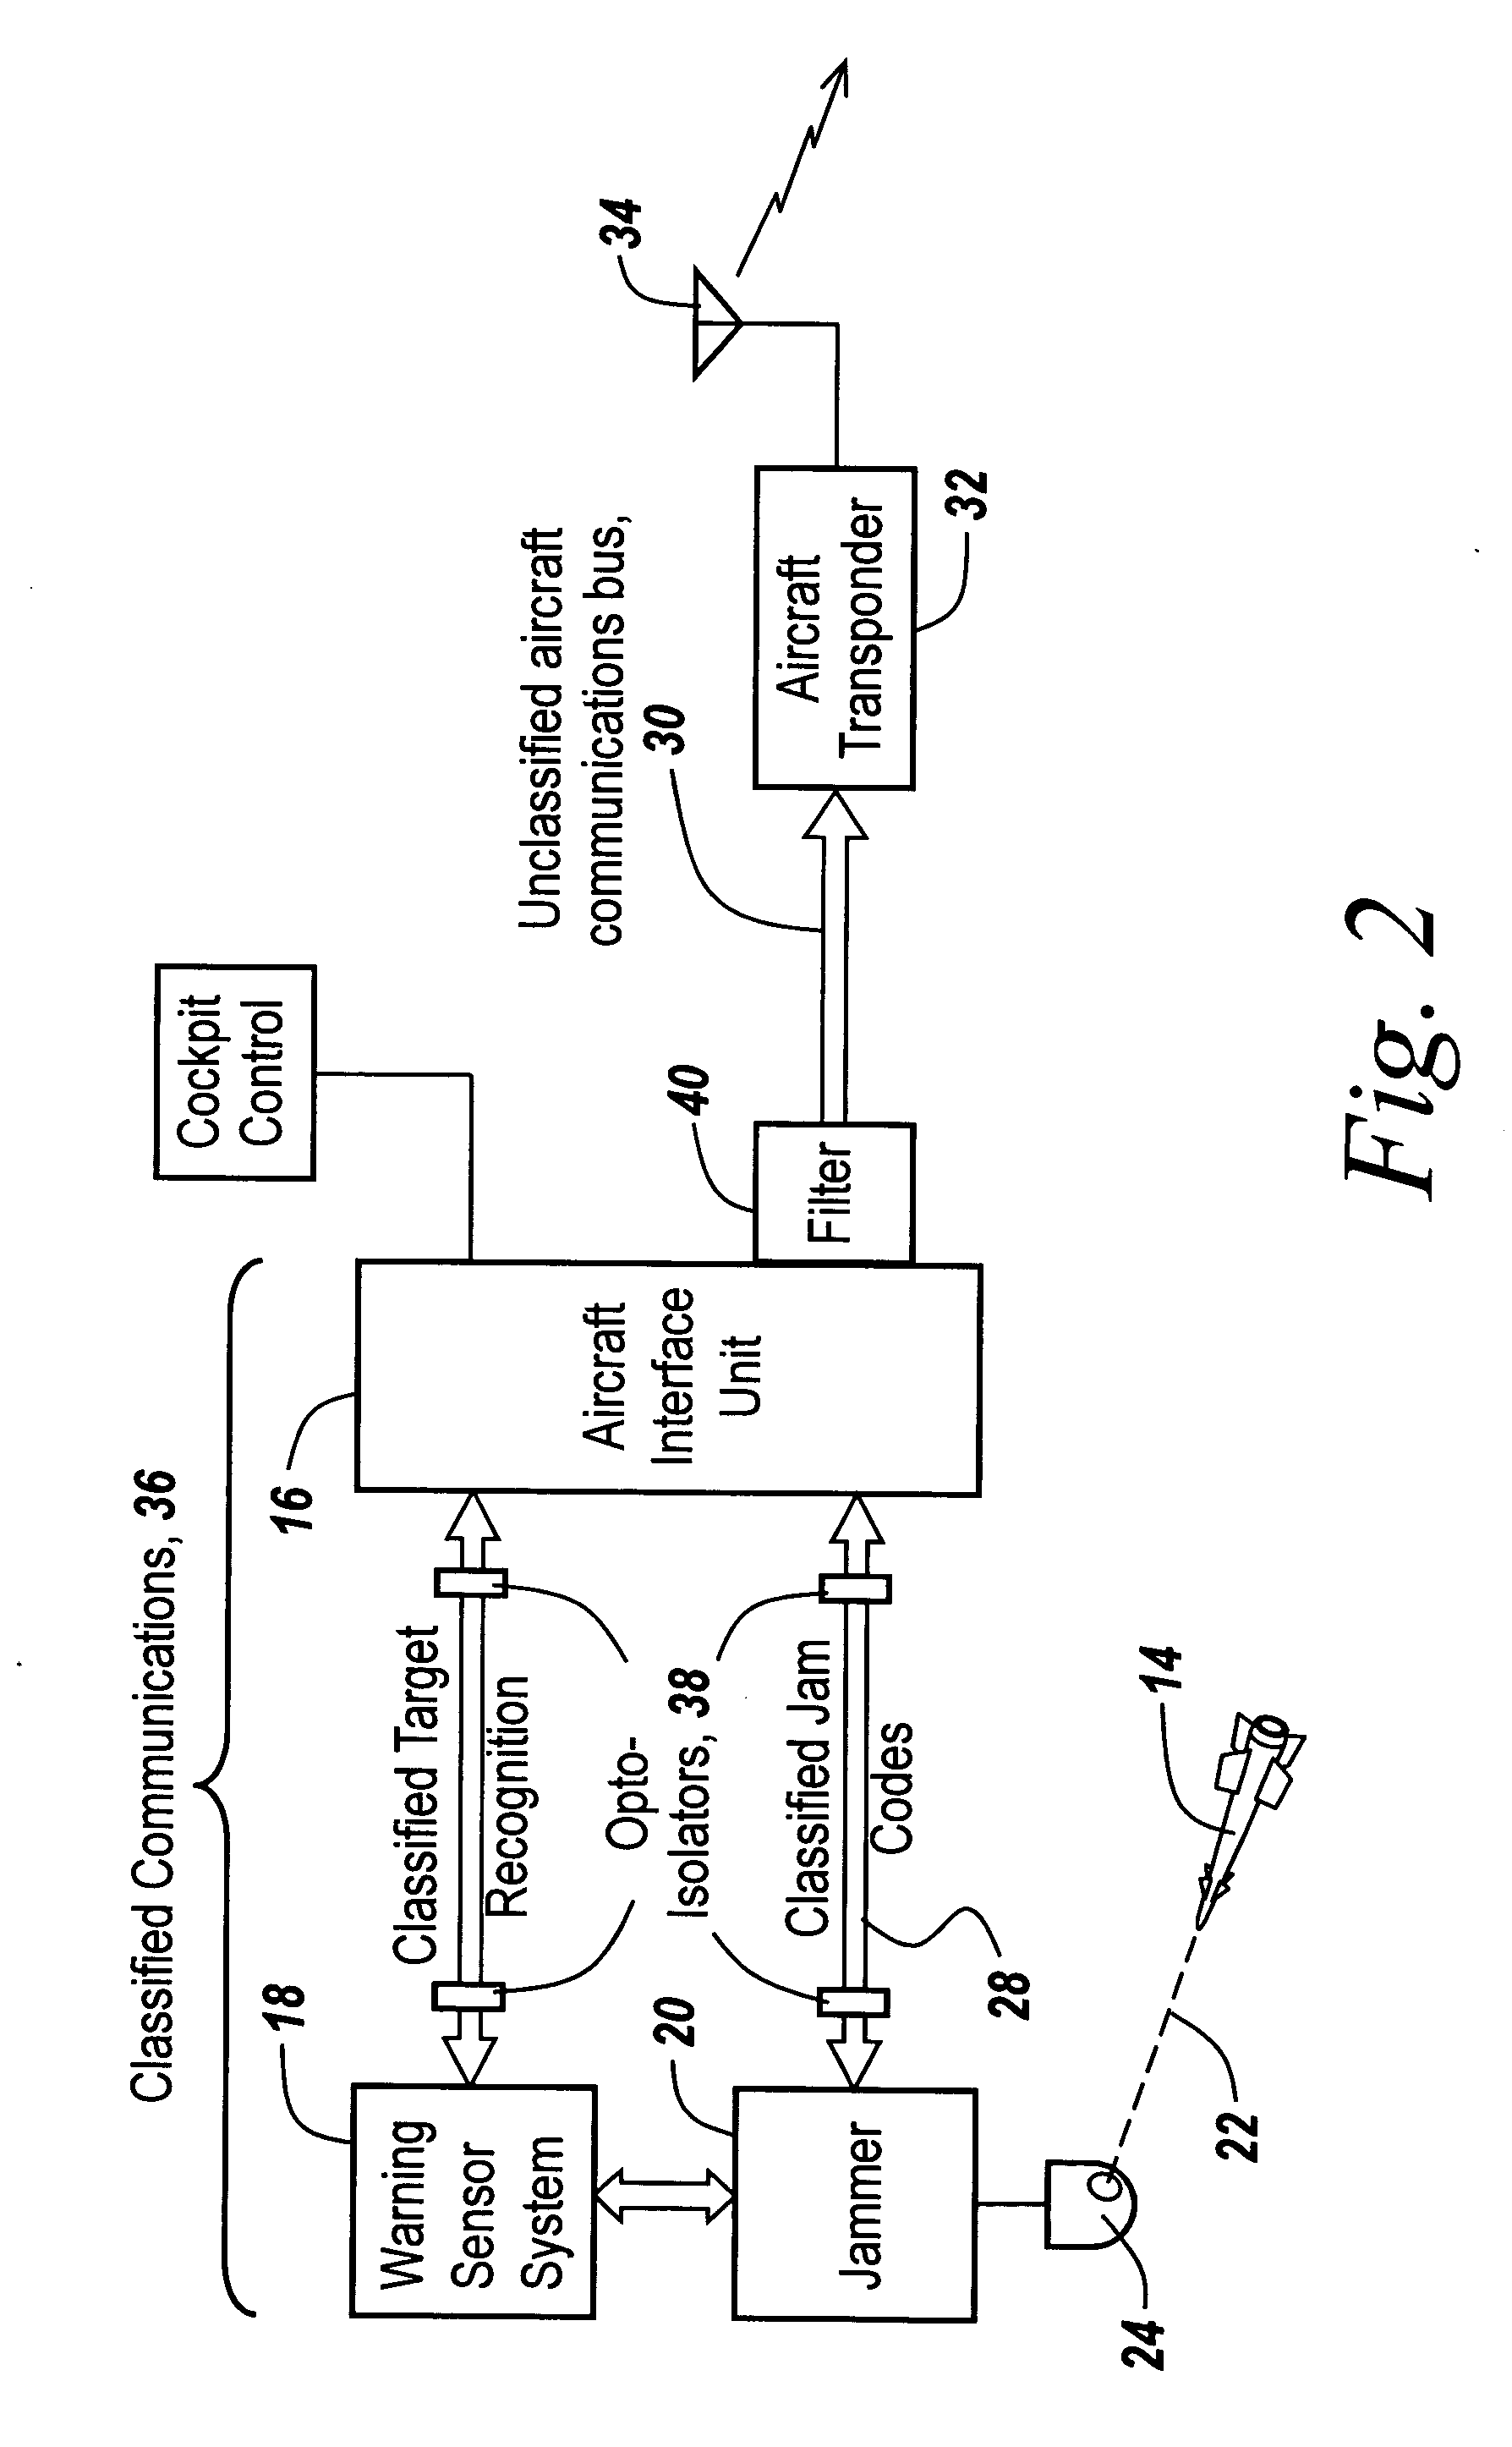 Method and apparatus for reporting a missle threat to a commercial aircraft